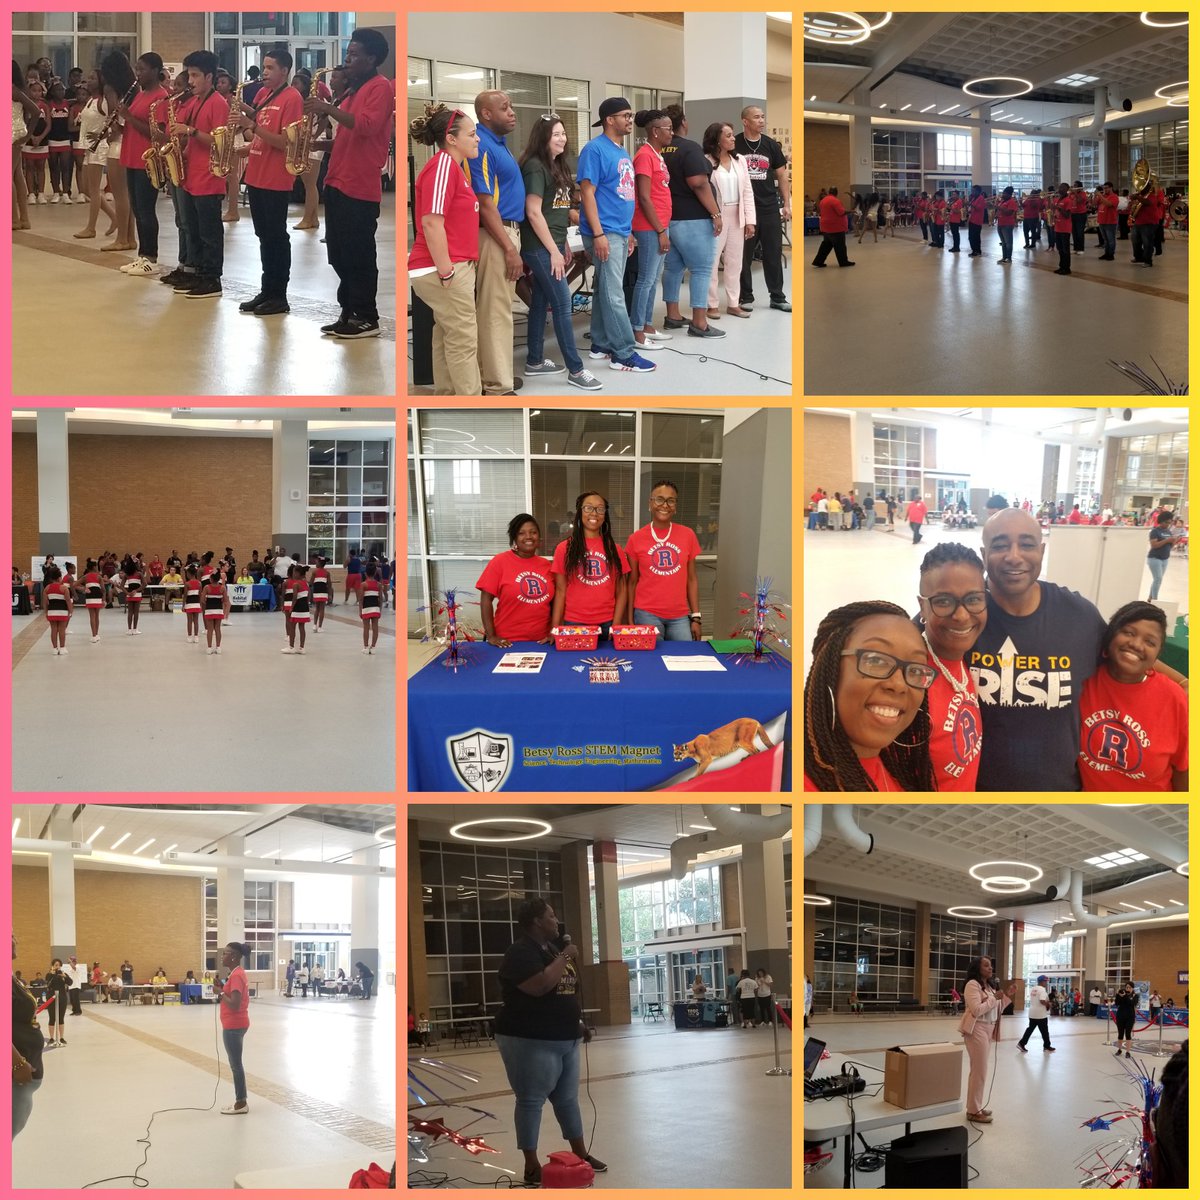 It's always a pleasure to work and have fun with your feeder pattern! #WeDoItForTheKids #WeAreOne @BetsyRossElem @KeyMS_Cougars @KashmereEL @KashmereHS @paige_eagles @McGowenES_HISD @CookES_HISD @TeamHISD @houstongent